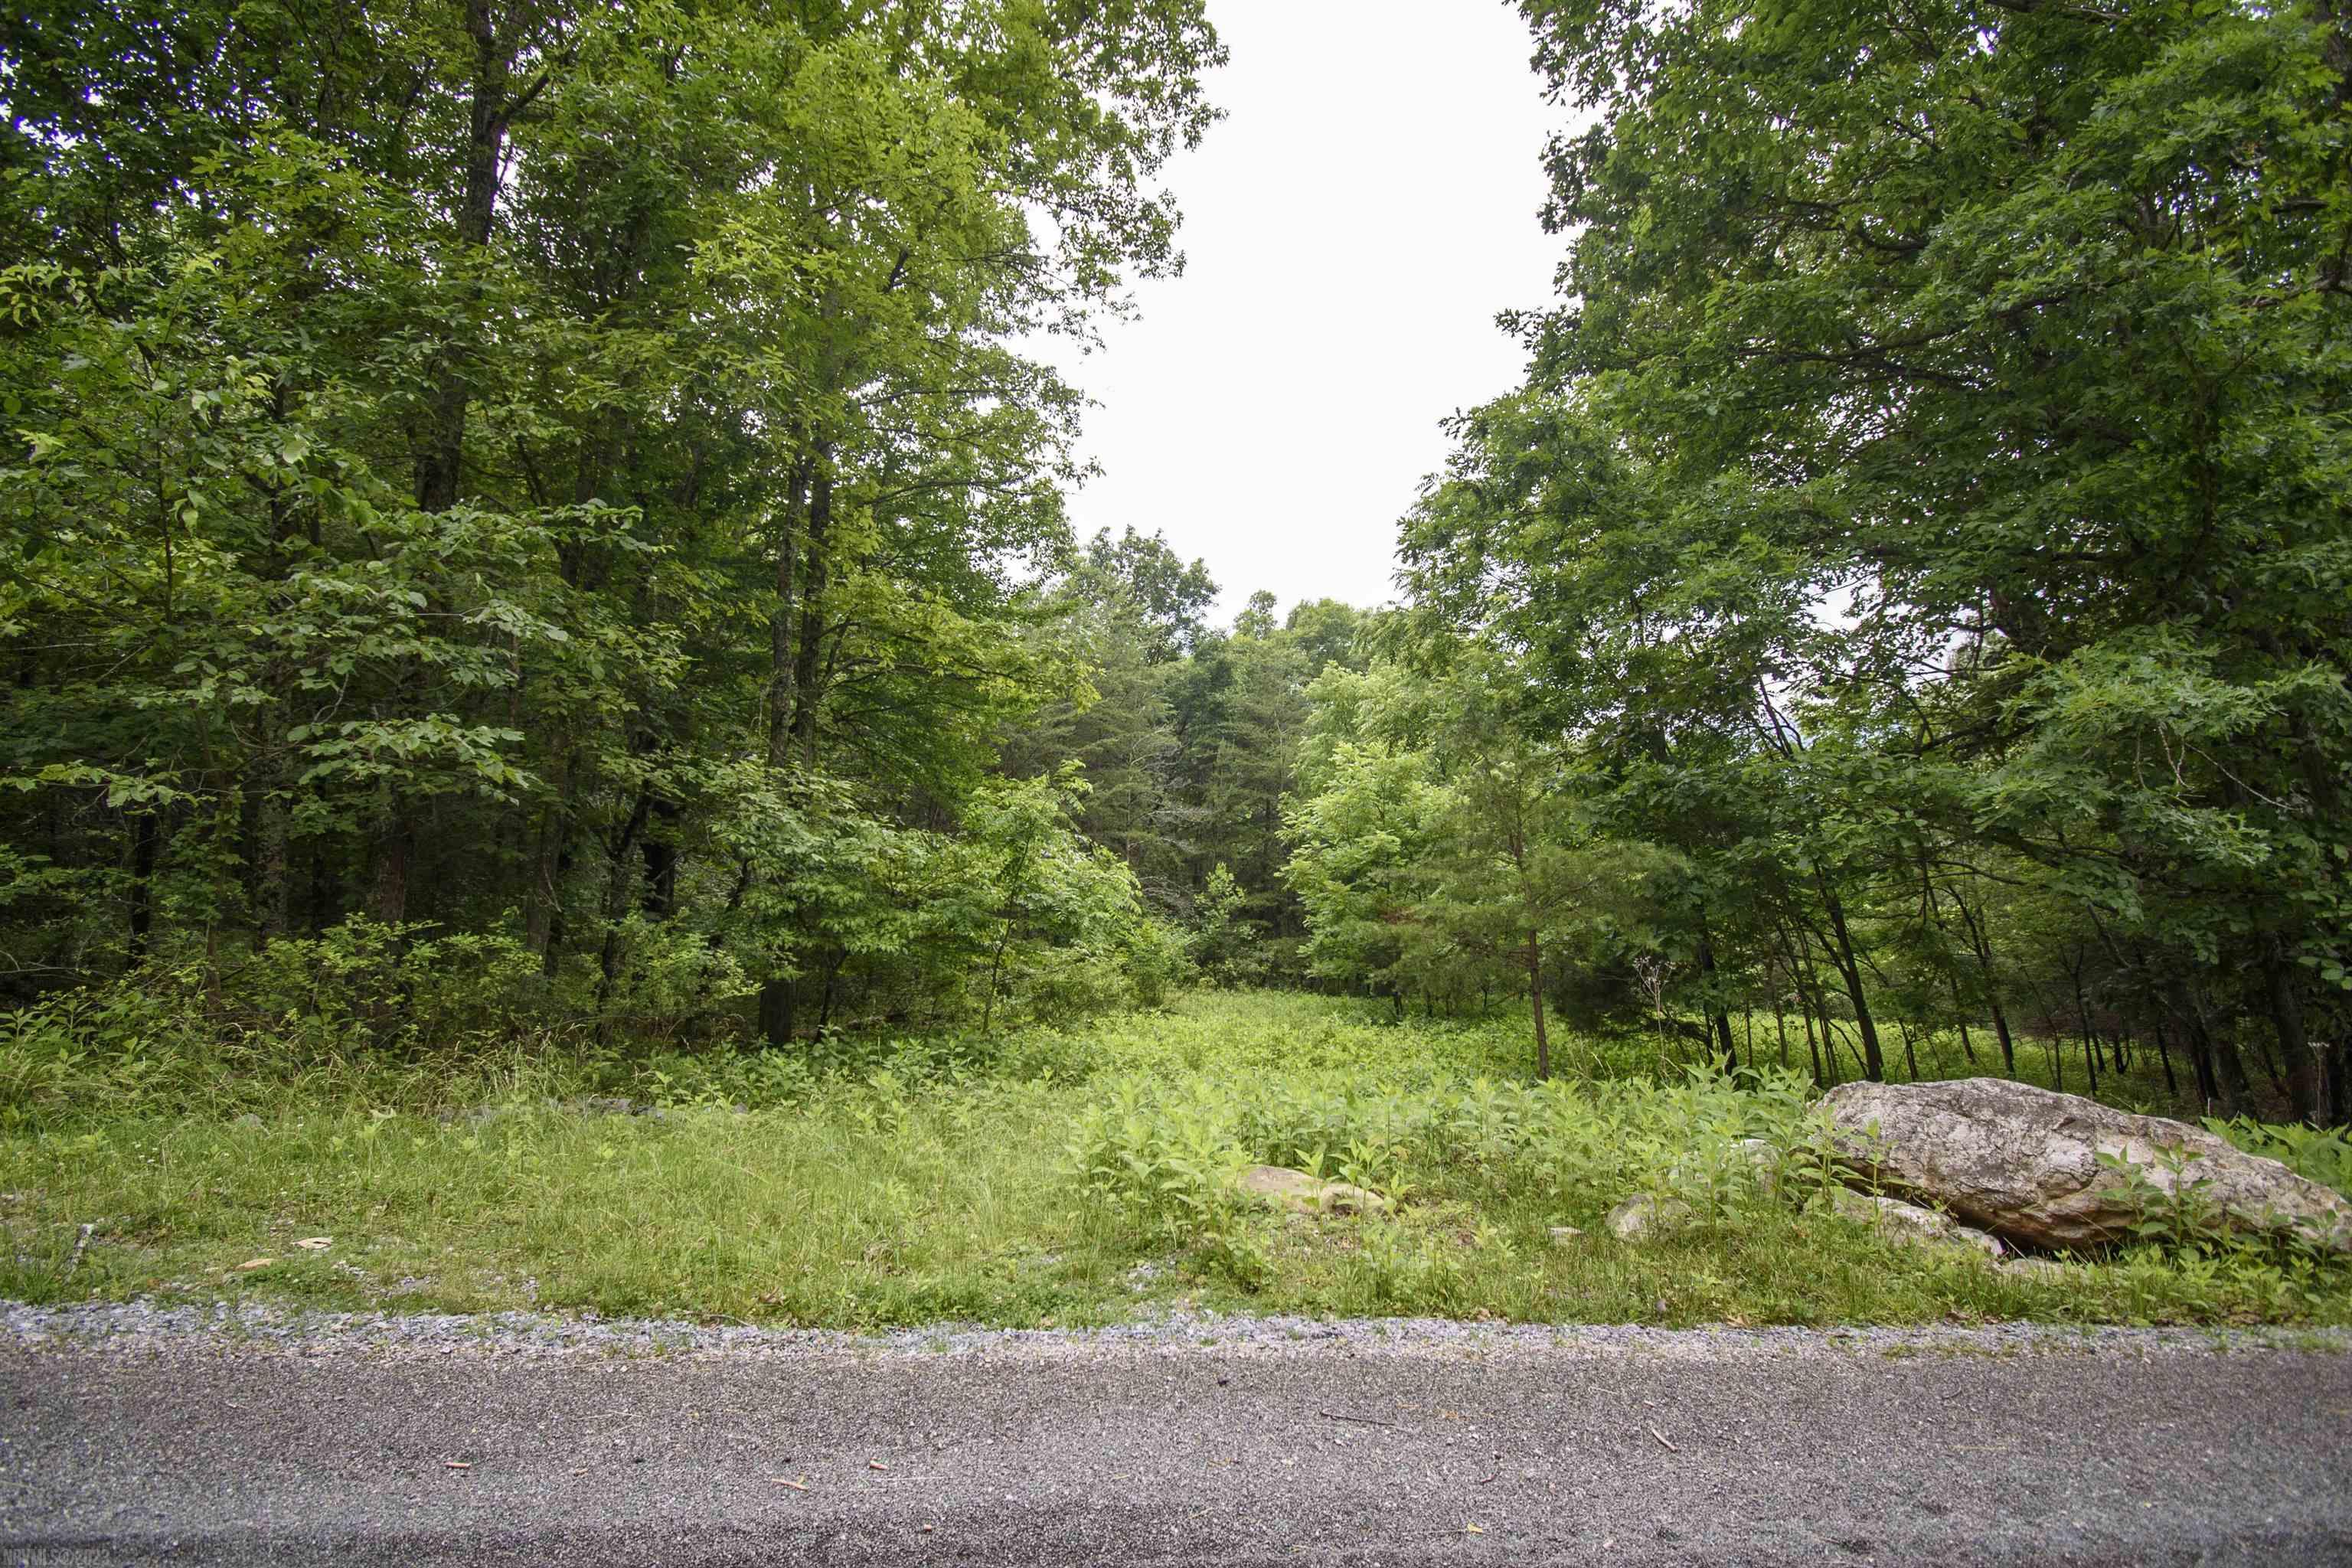 Come stay in the mountains of the highly sought after New River Valley.  No shortage of hiking trails, biking, hunting, kayaking.  Whether its a home you're after or a vacation get away, this land will make your dreams come true!